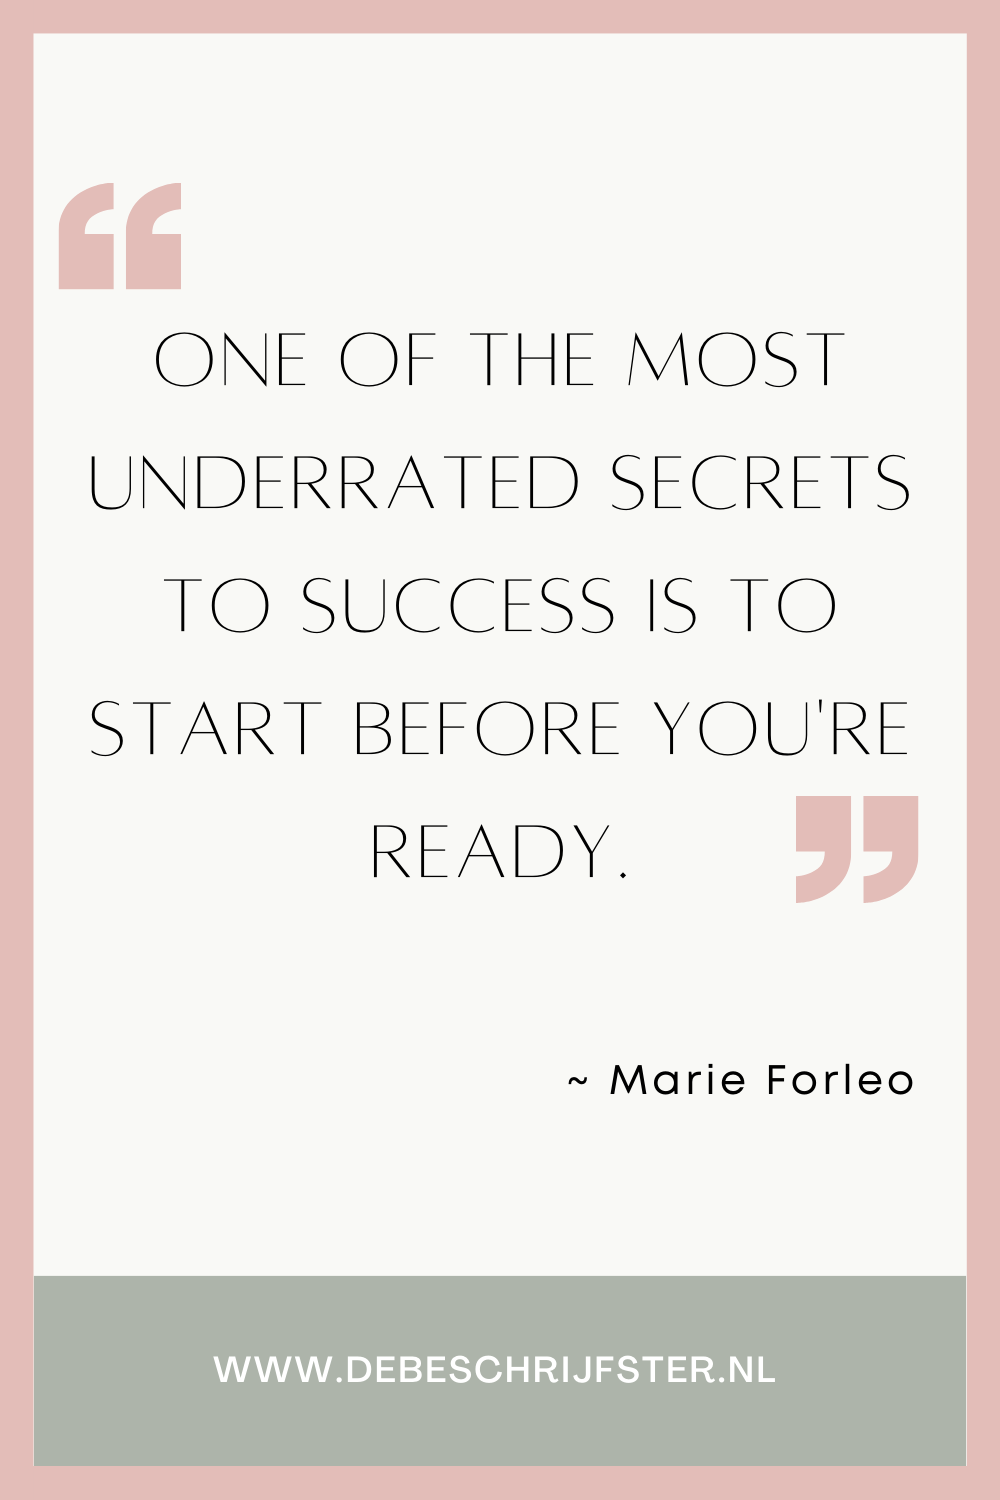 One of the most underrated secrects to success is to start before you're ready. Marie Forleo